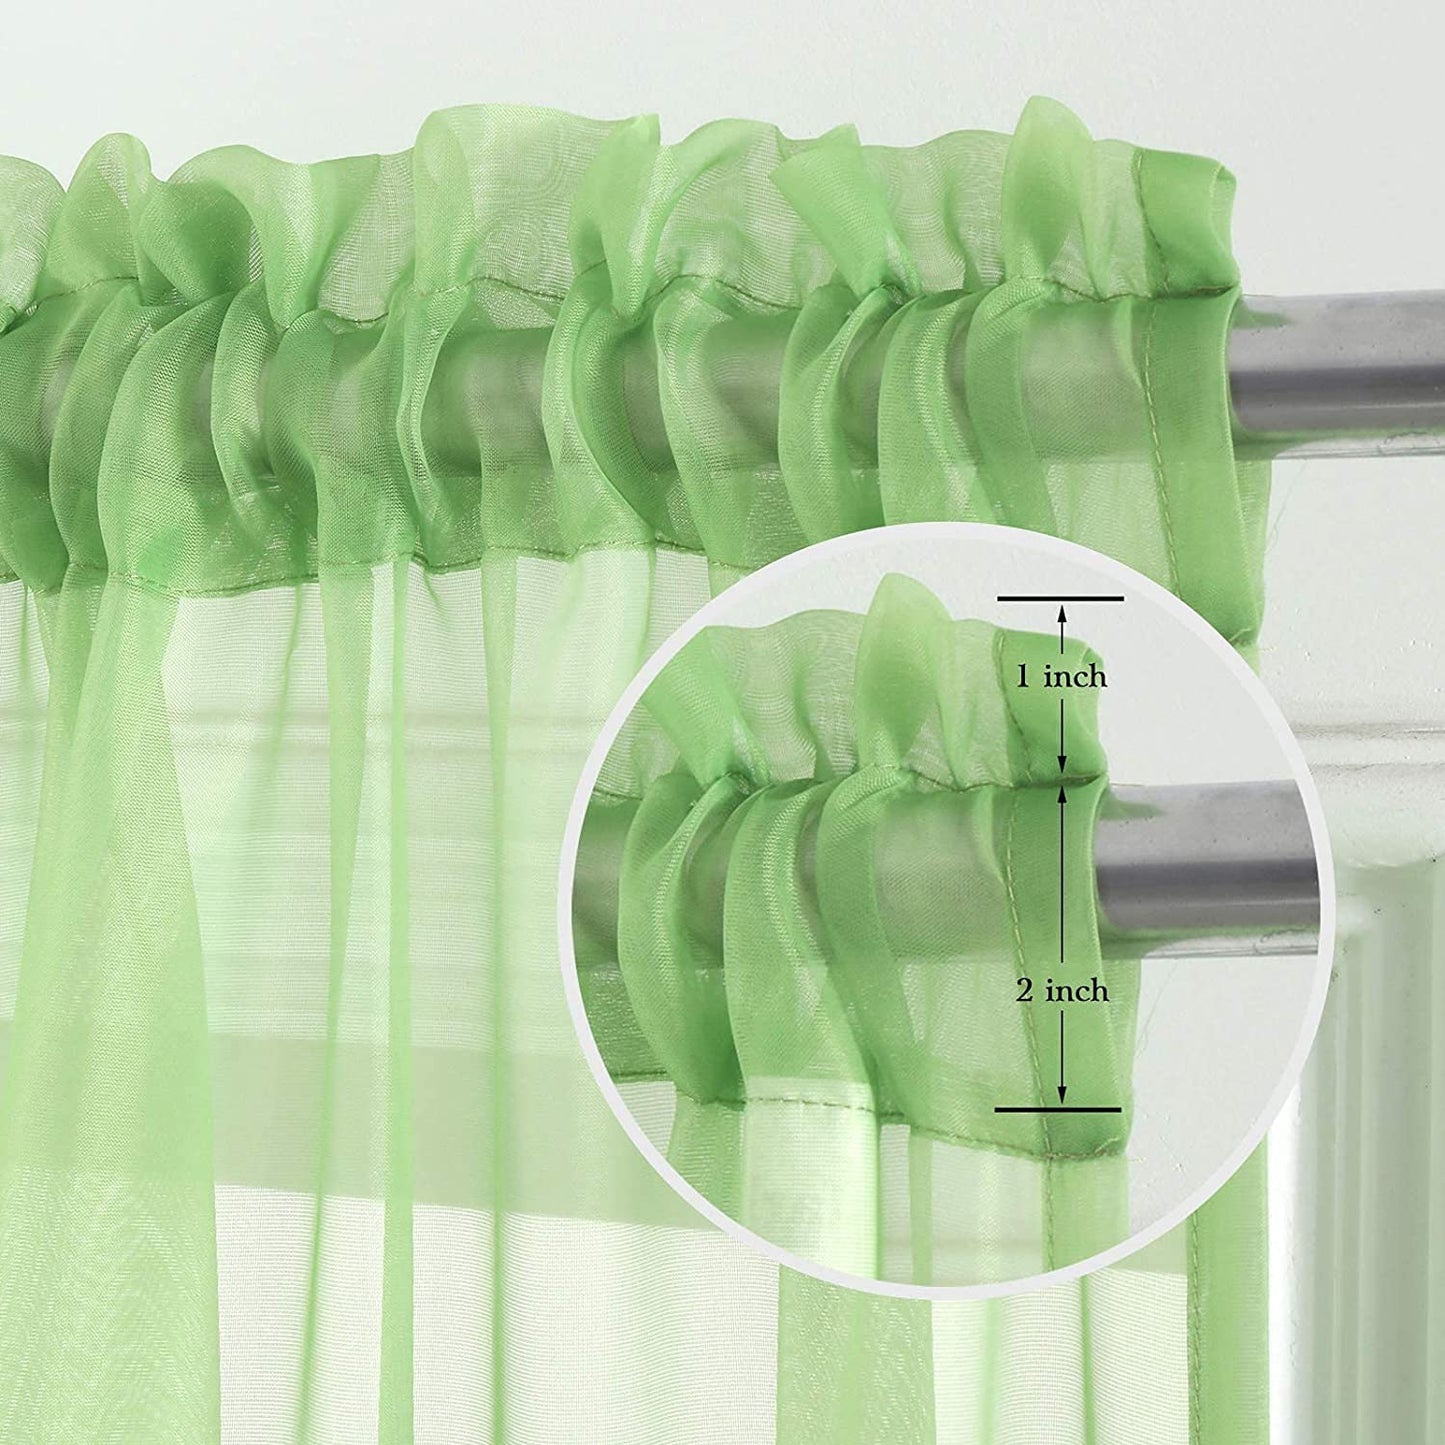 Sheer Voile Curtain,Sunlight Filtering Protect Privacy Polyester Sheer for your home